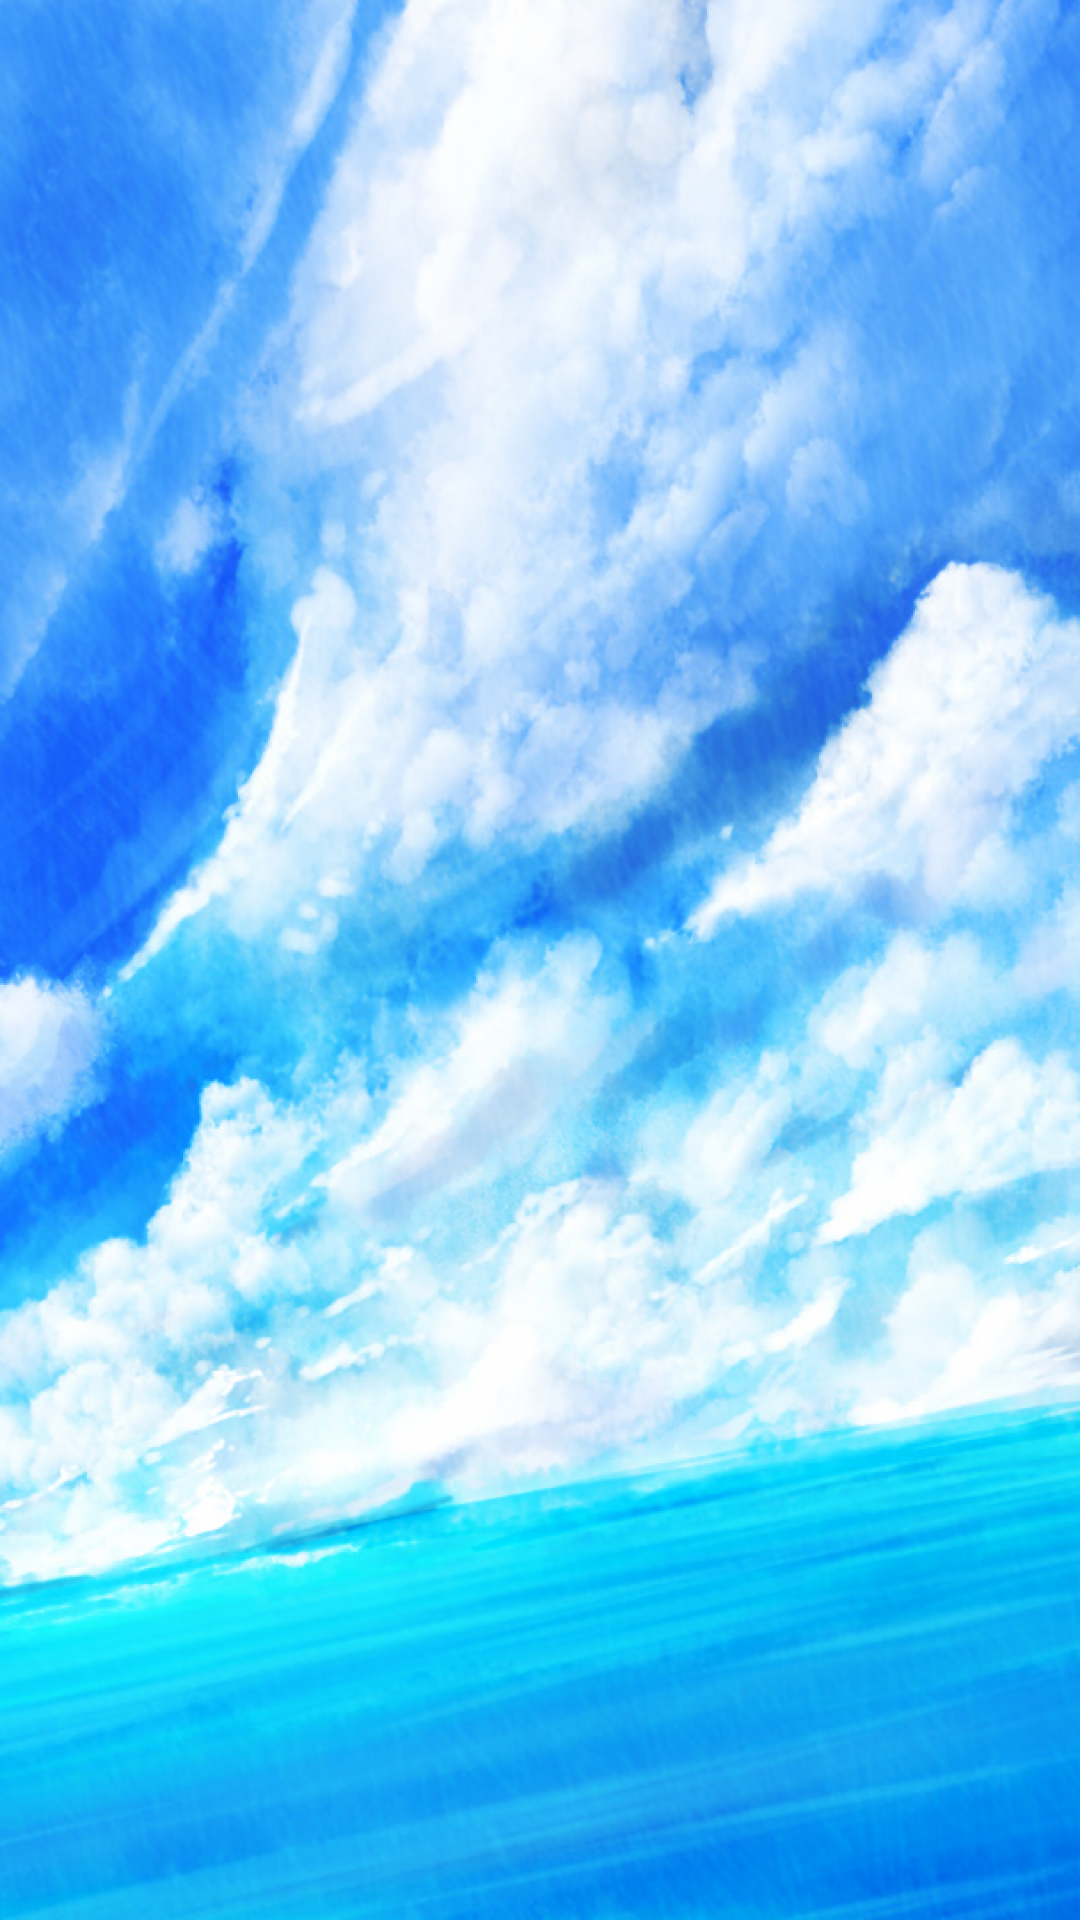 Download 1080x1920 Anime Landscape, Anime Girl, Clouds, Ocean Wallpaper for iPhone iPhone 7 Plus, iPhone 6+, Sony Xperia Z, HTC One